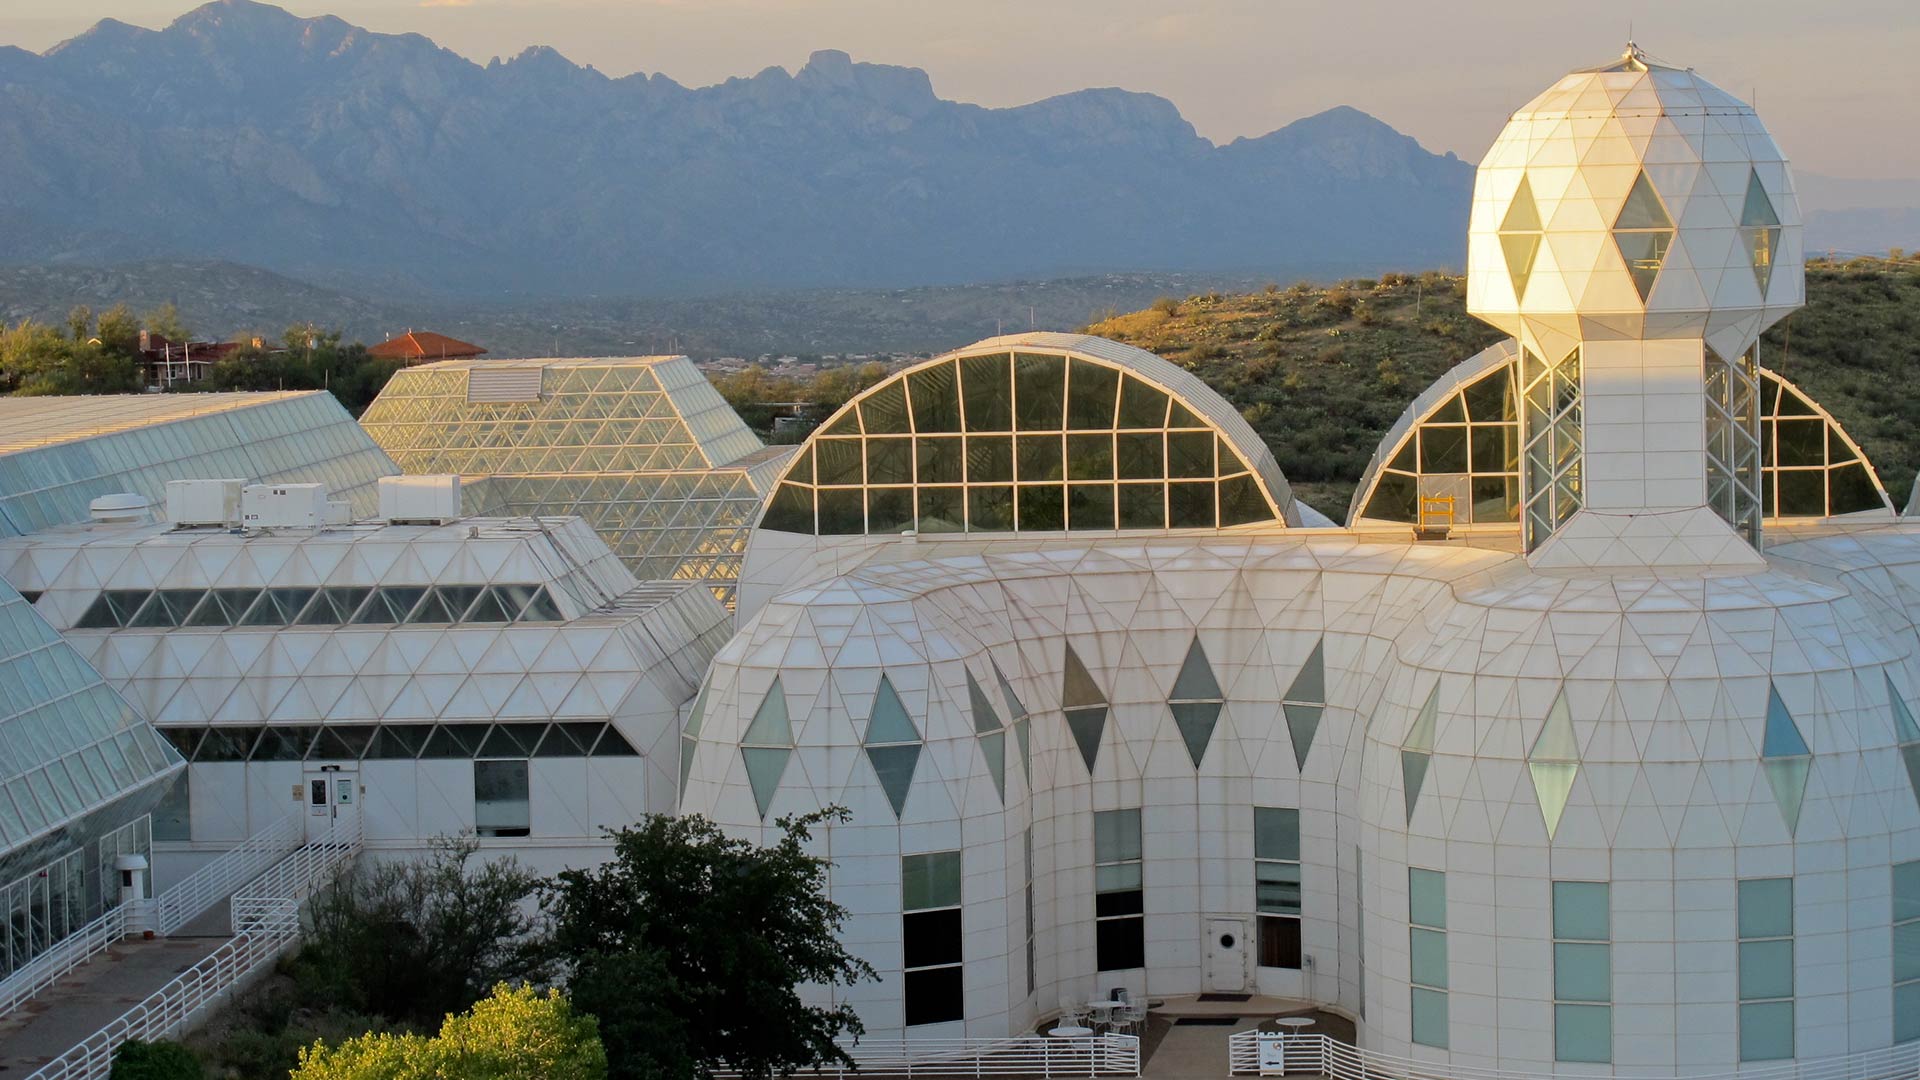 Sunset at the Biosphere 2 science and research facility north of Tucson